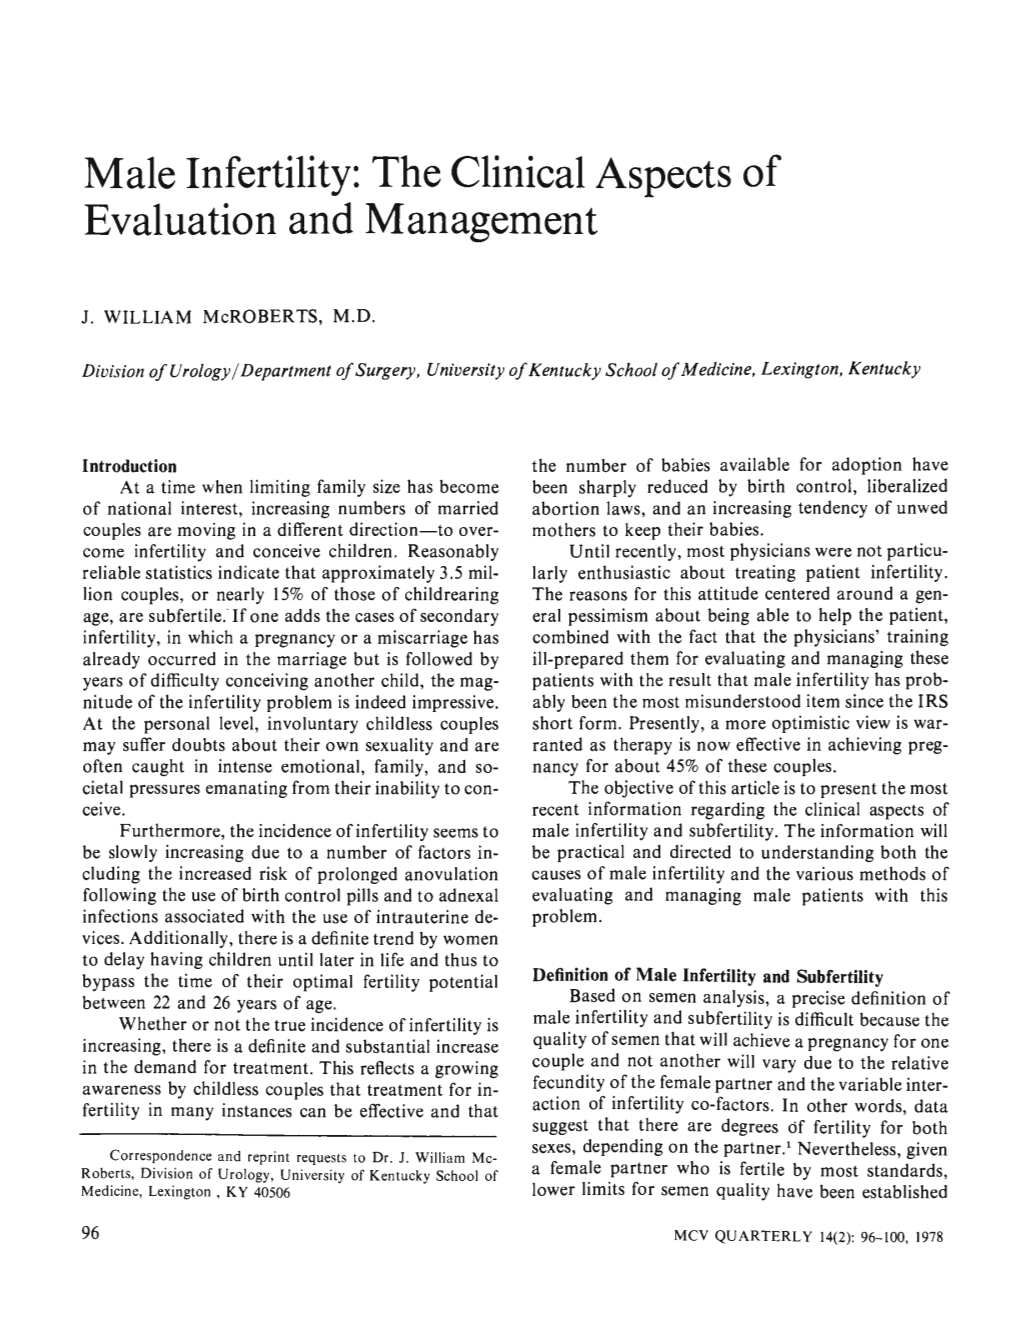 Male Infertility: the Clinical Aspects of Evaluation and Management